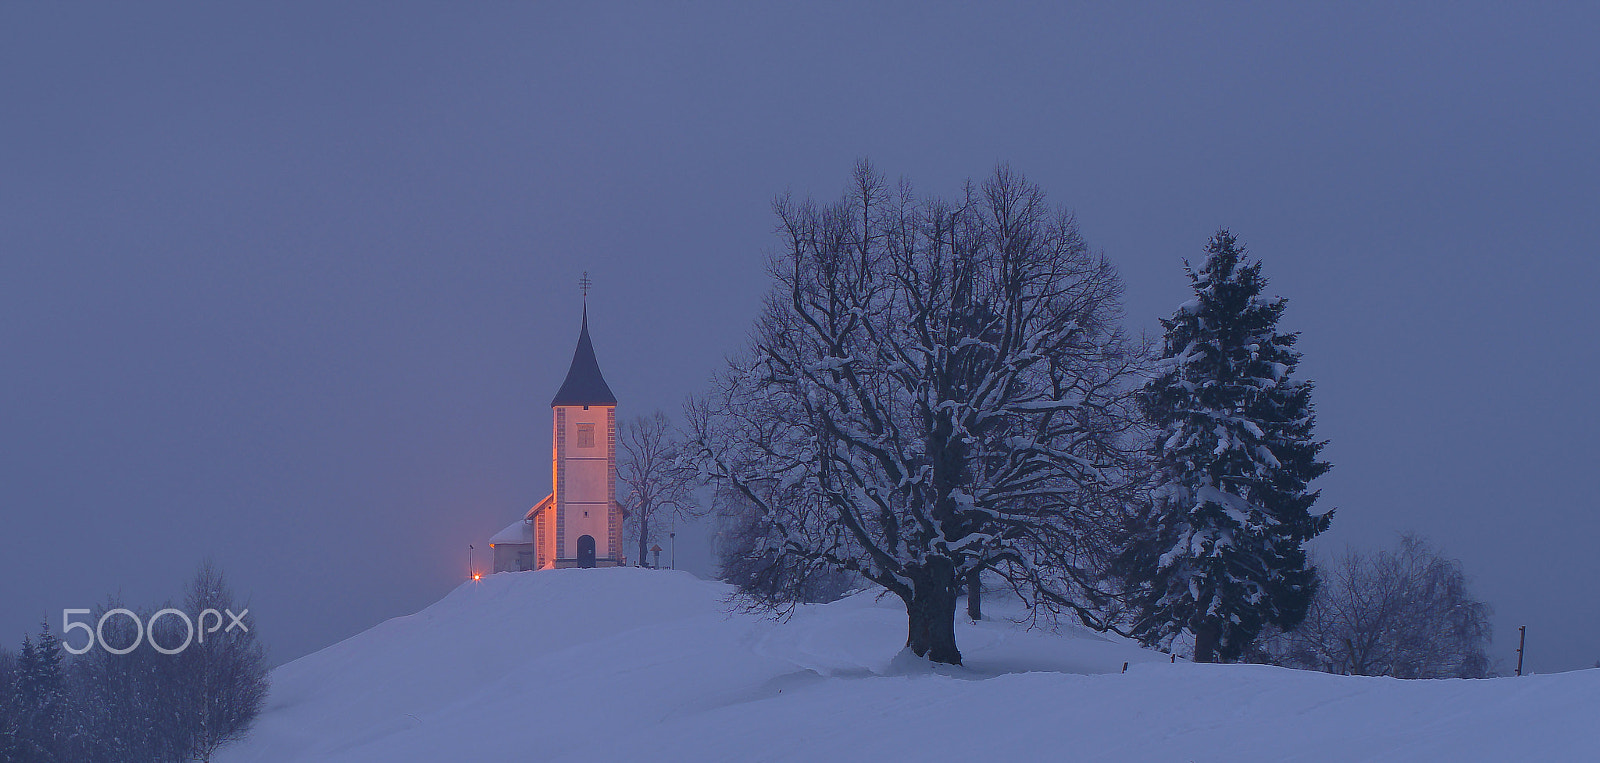 Pentax smc FA 50mm F1.4 sample photo. Jamnik - iconic church with markant tree in front photography